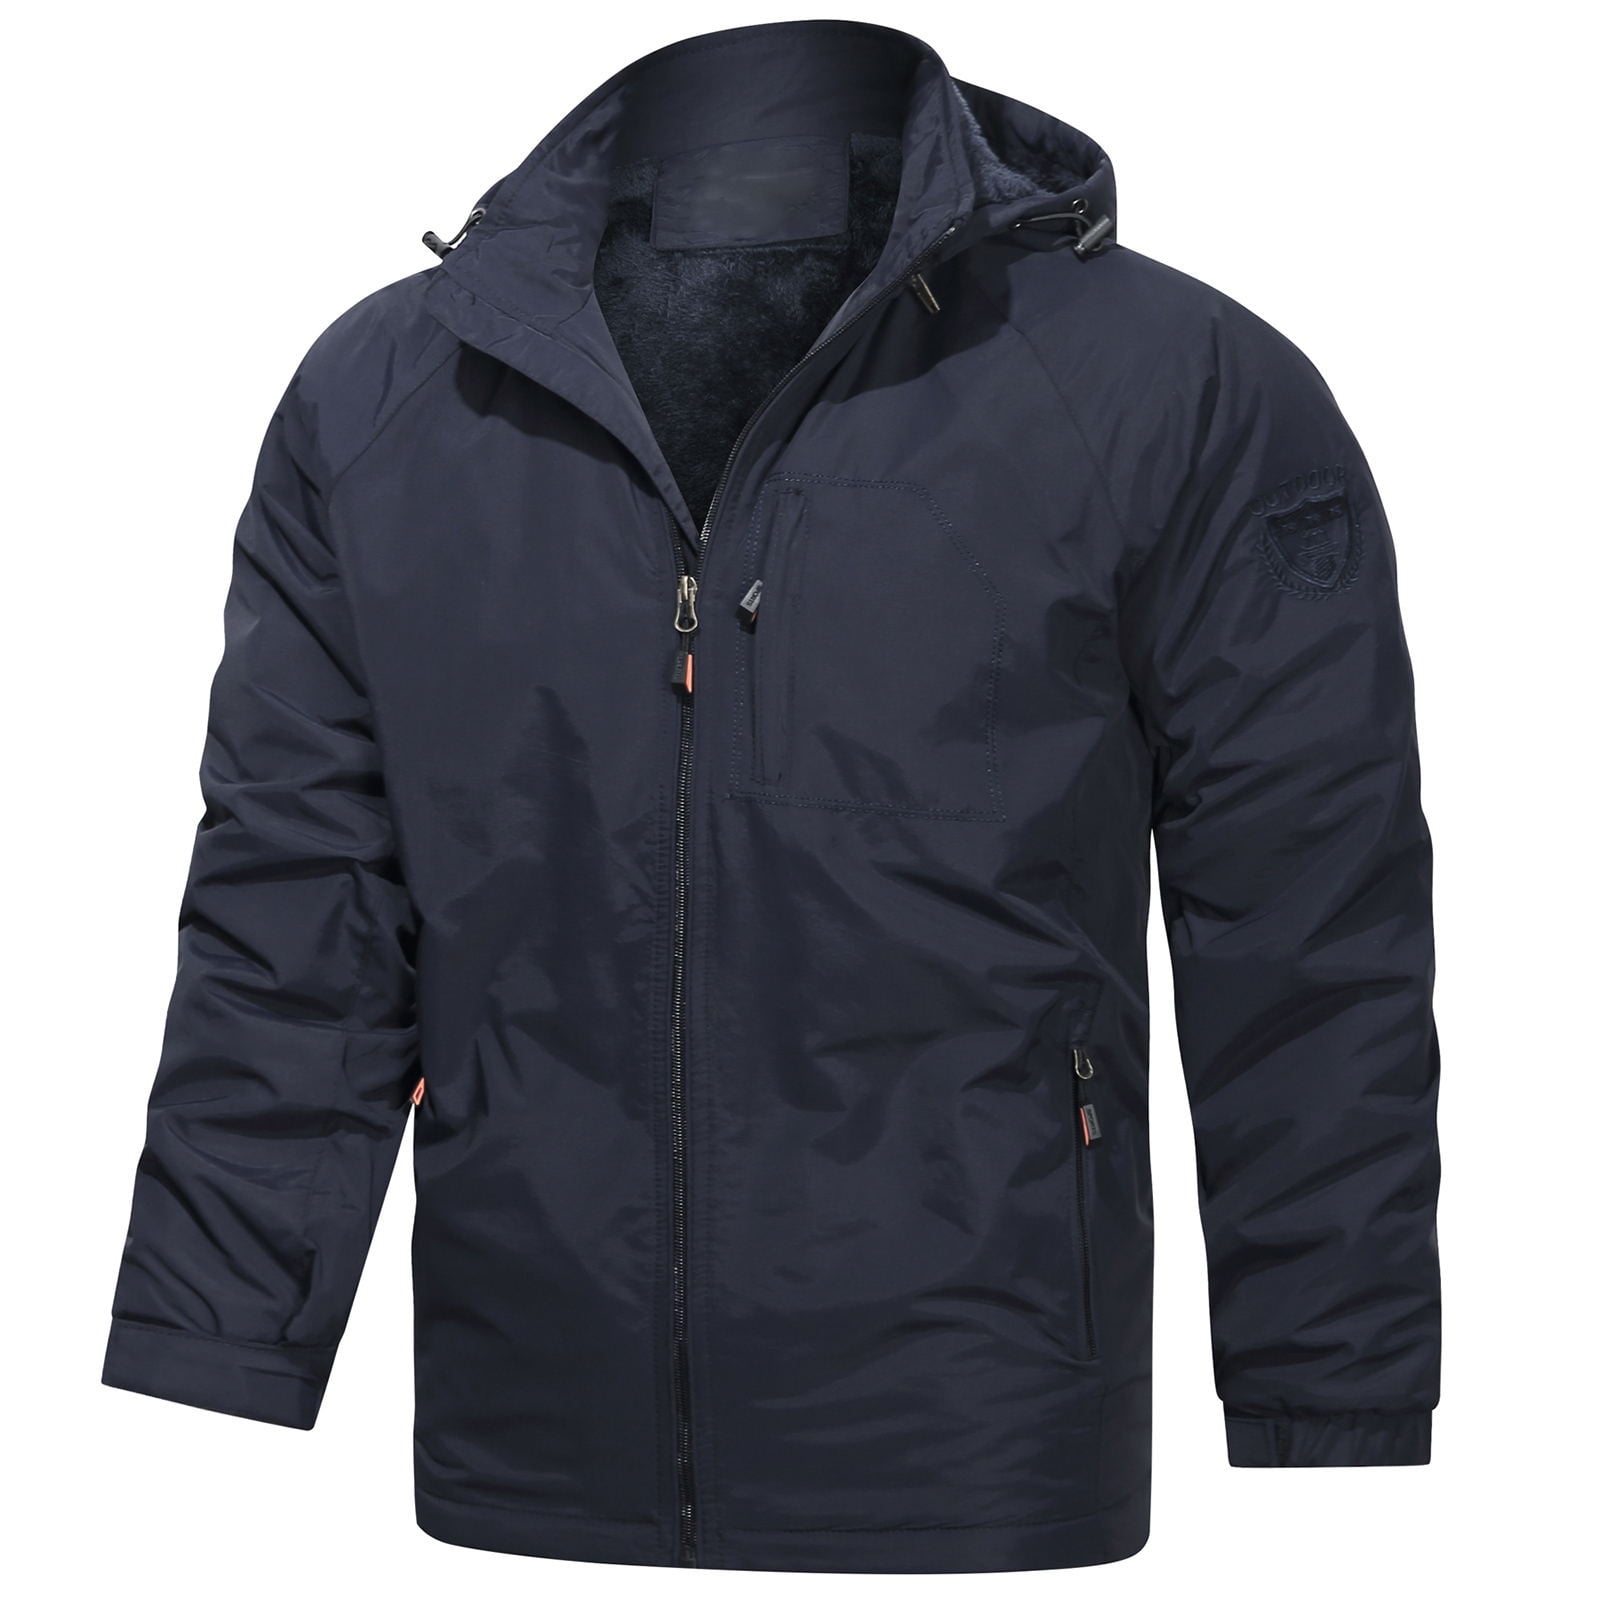 Fall for Savings ! BVnarty Jackets for Men Long Sleeve Wind Jacket